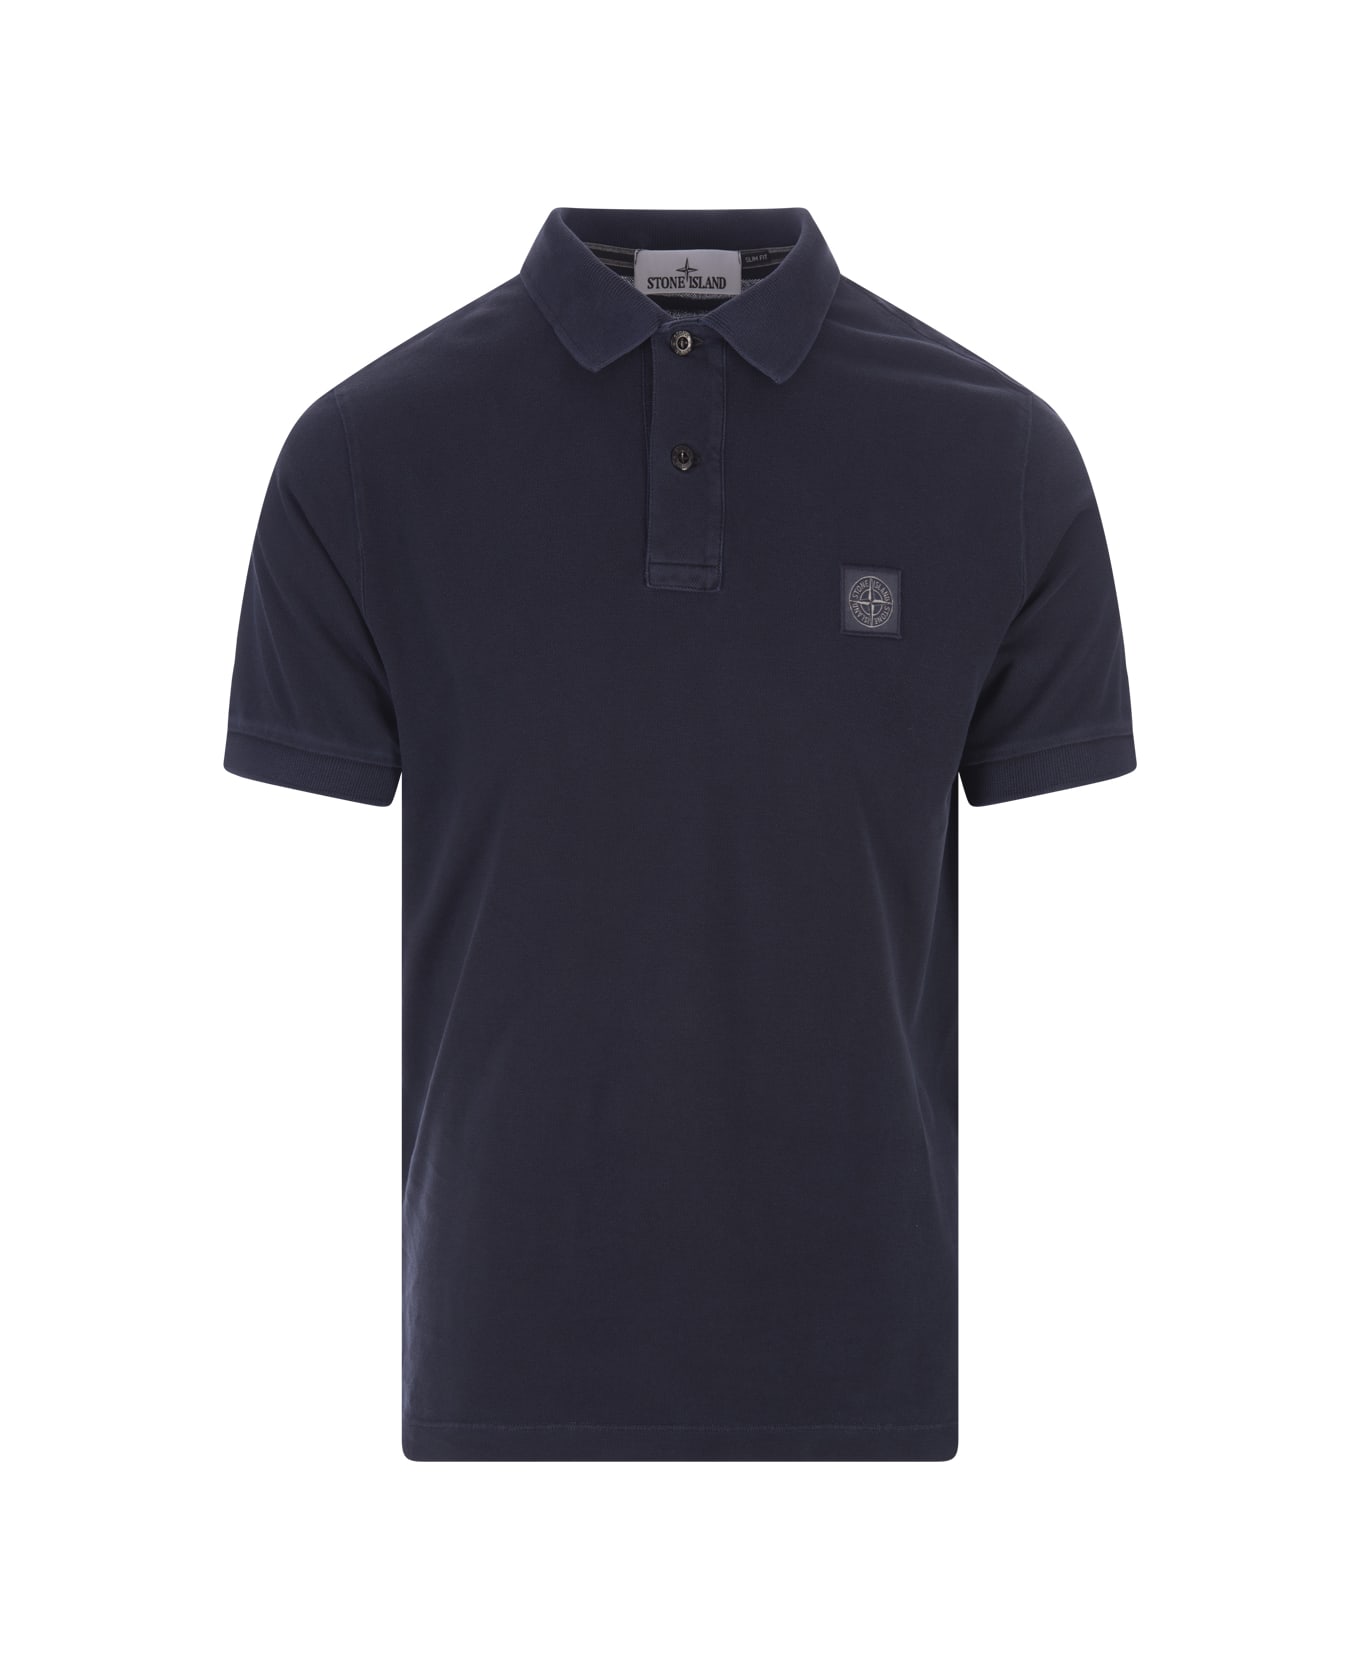 Stone Island Navy Blue Pigment Dyed Slim Fit Polo Shirt - Blue